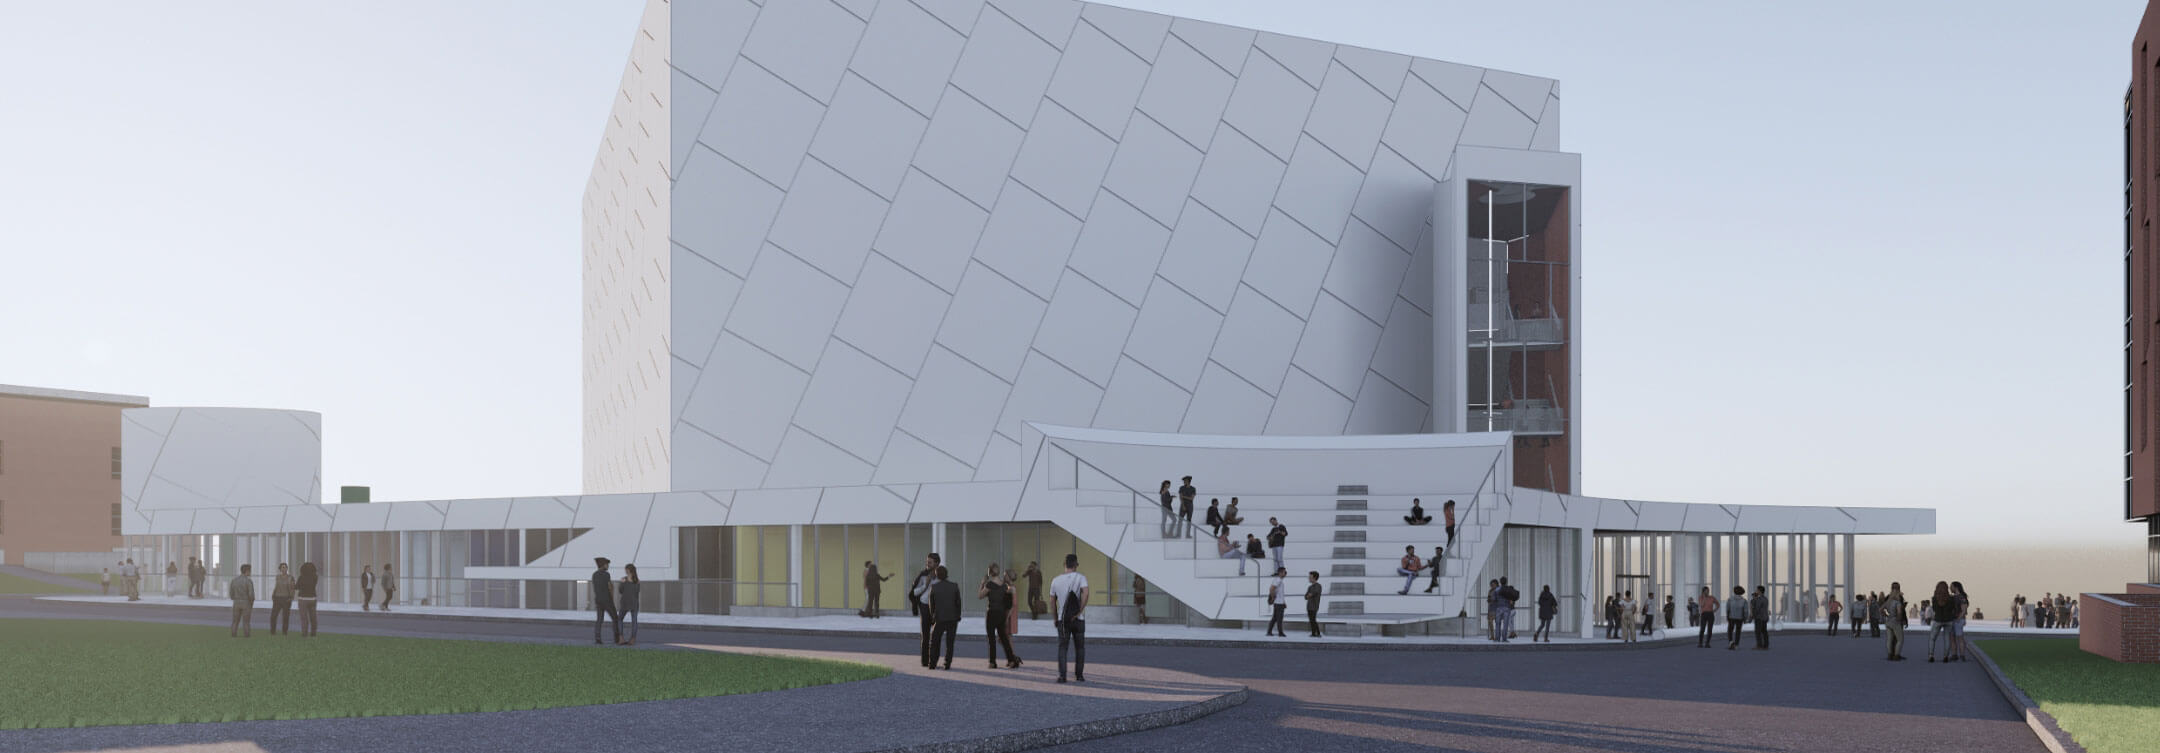 A rendering of the exterior of the proposed Music Performance Theater, featuring an amphitheater.